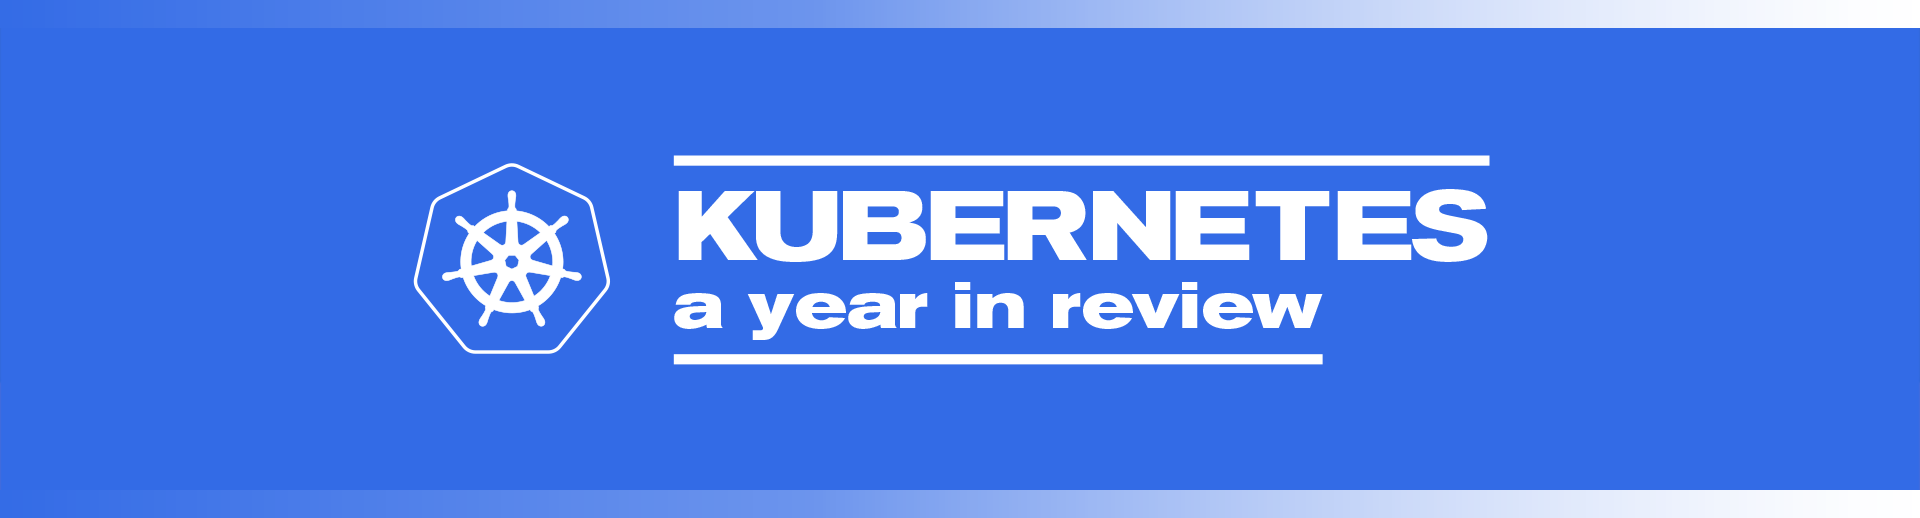 A typographic lockup of the Kubernetes logo and text 'KUBERNETES: A Year in Review'